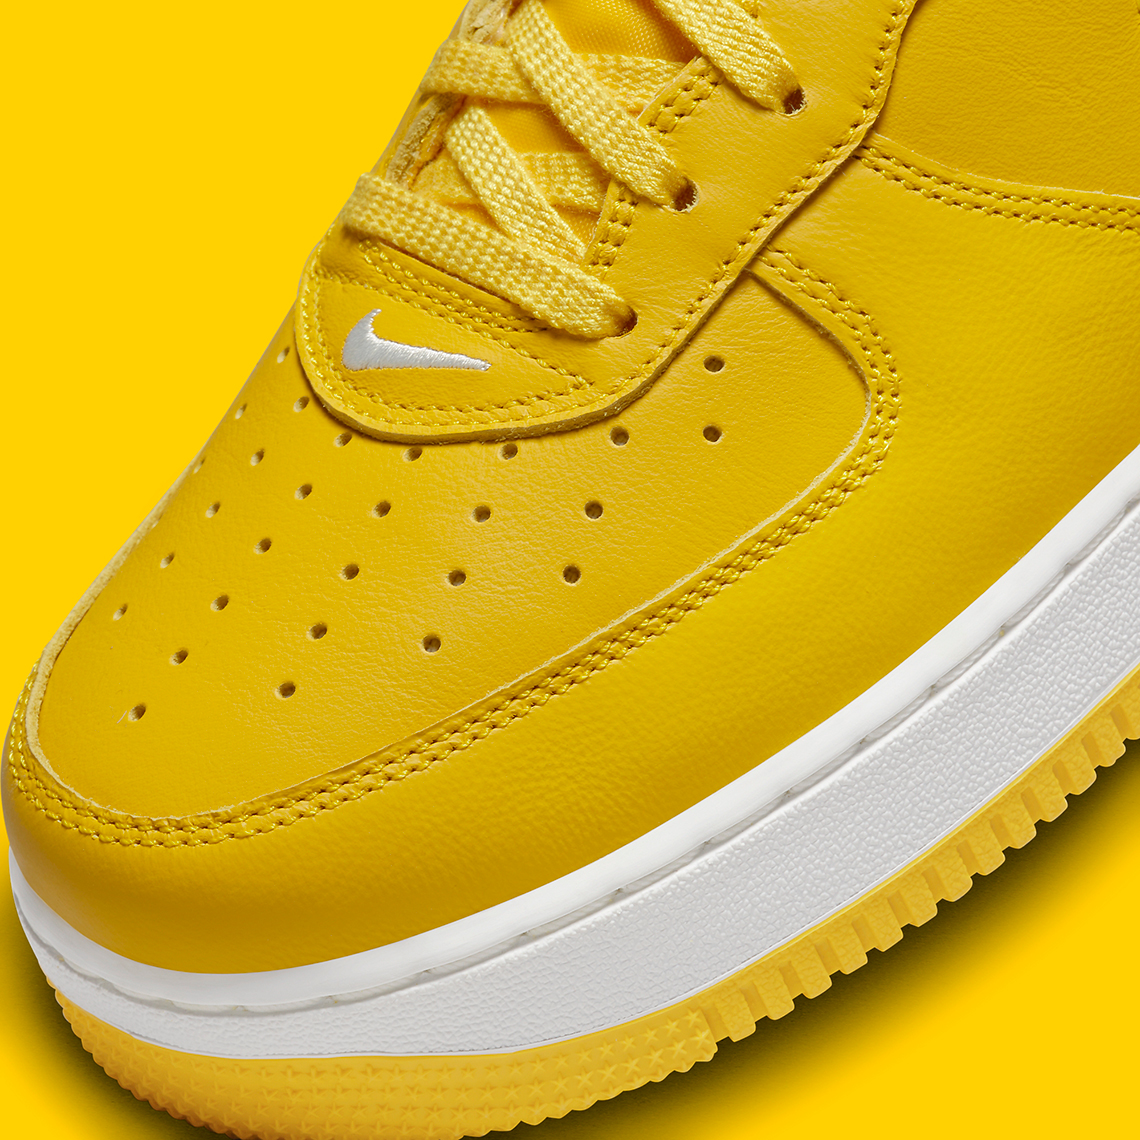 nike air force 1 low color of the month yellow fj1044 700 2